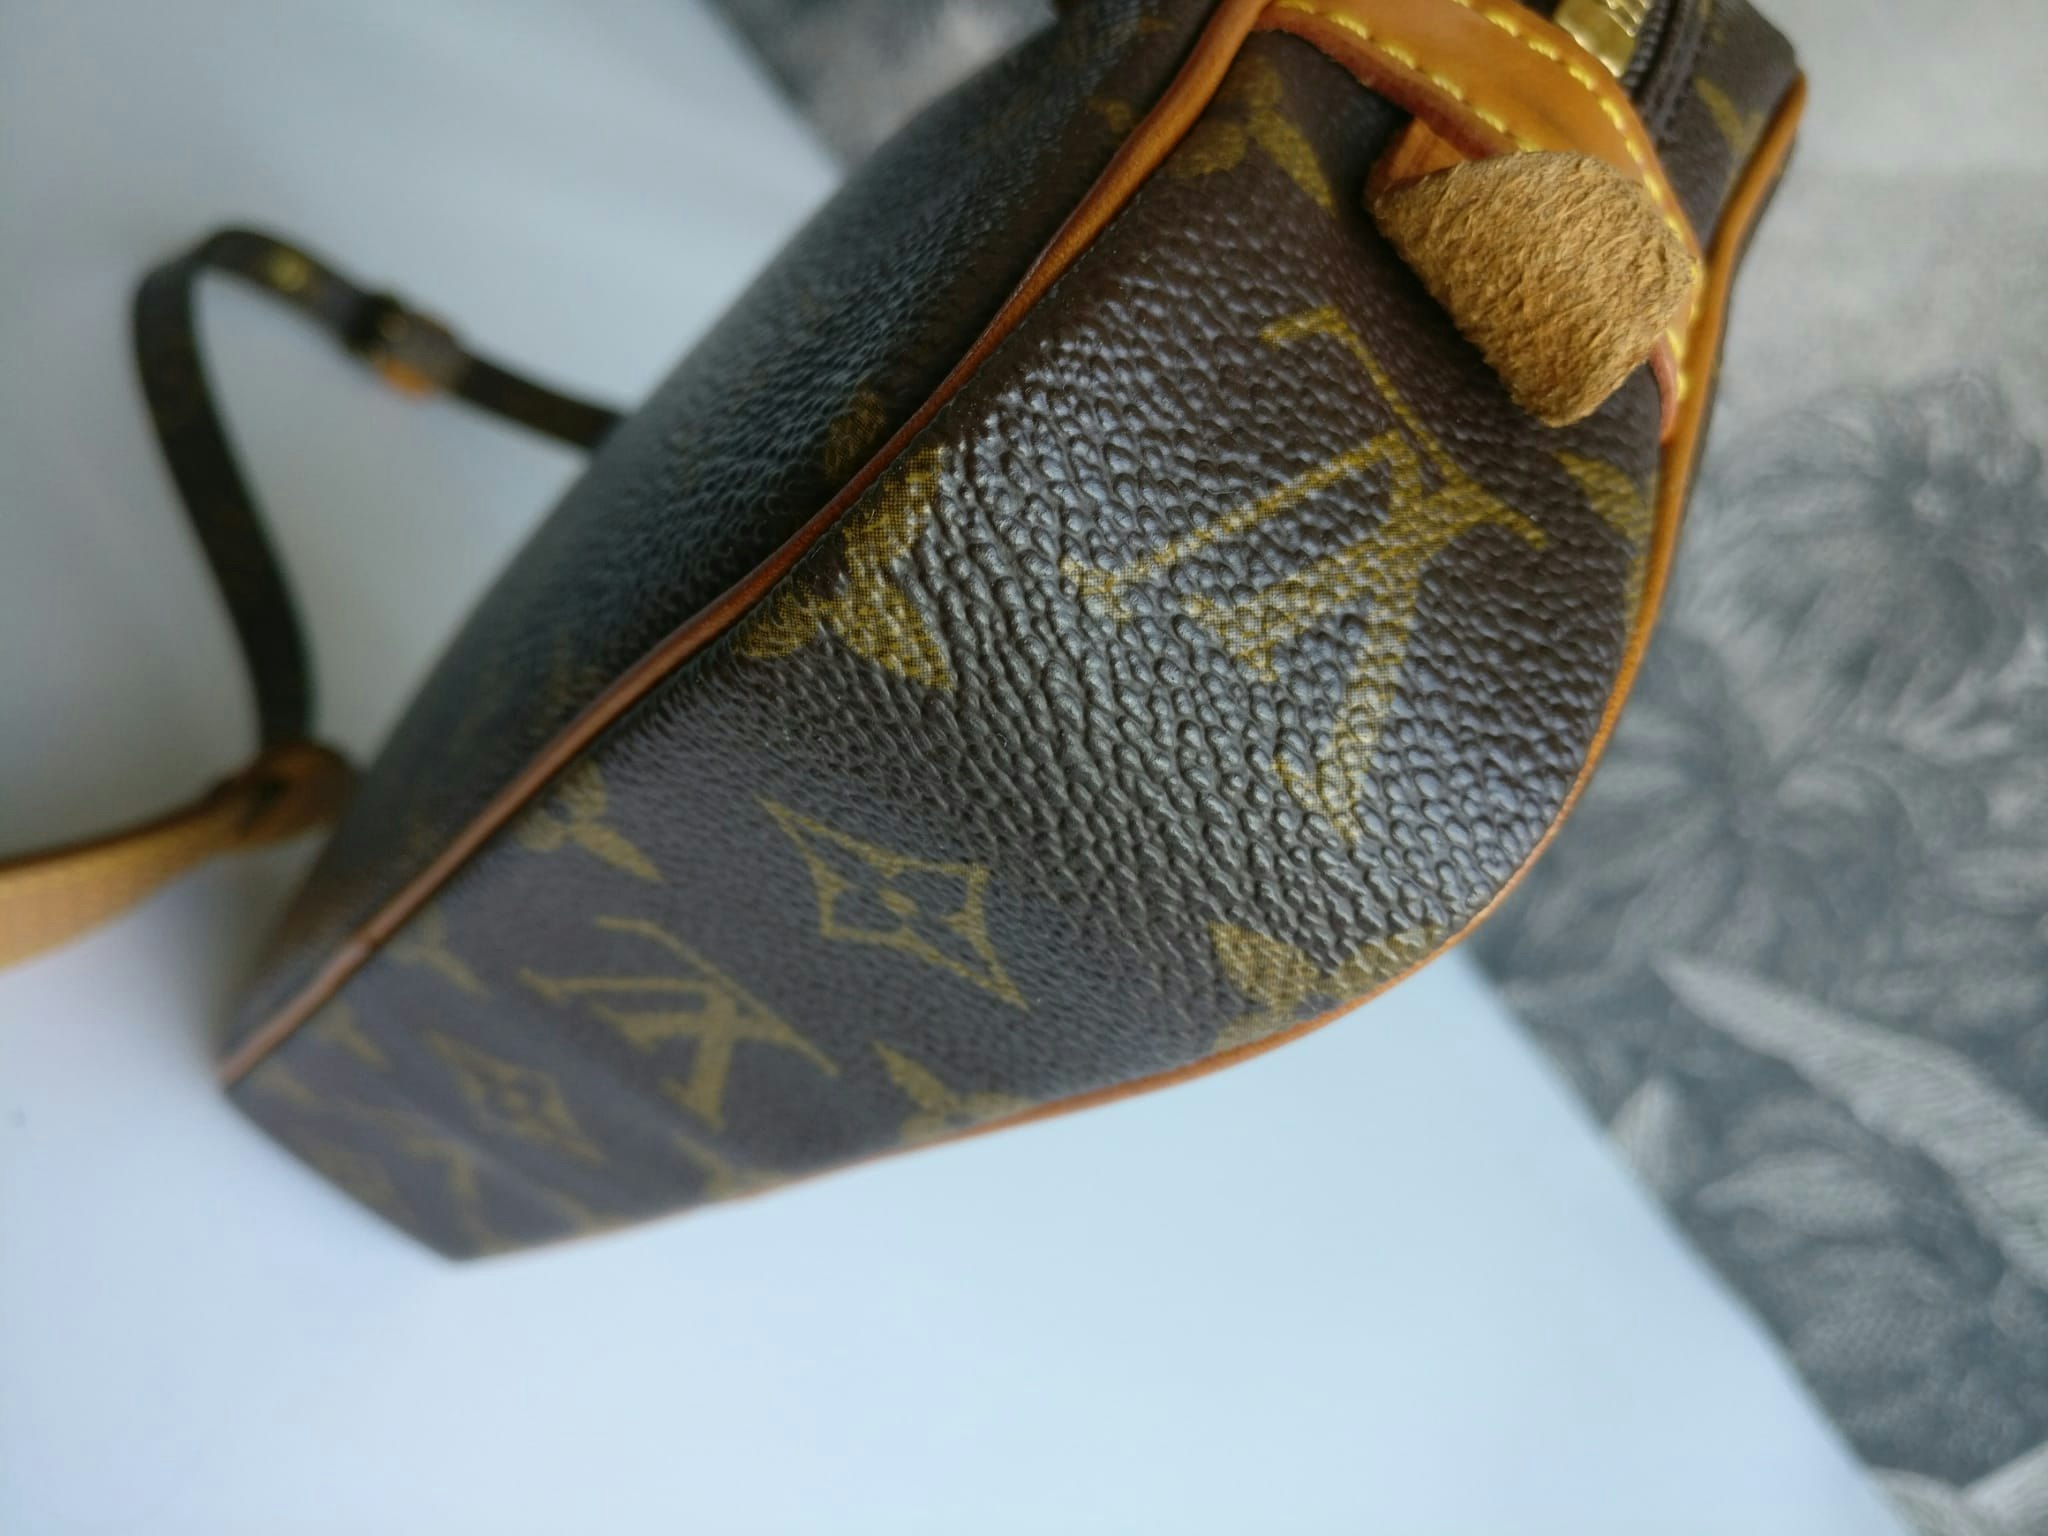 Louis Vuitton 2000 pre-owned Marly Bandoulière Crossbody Bag